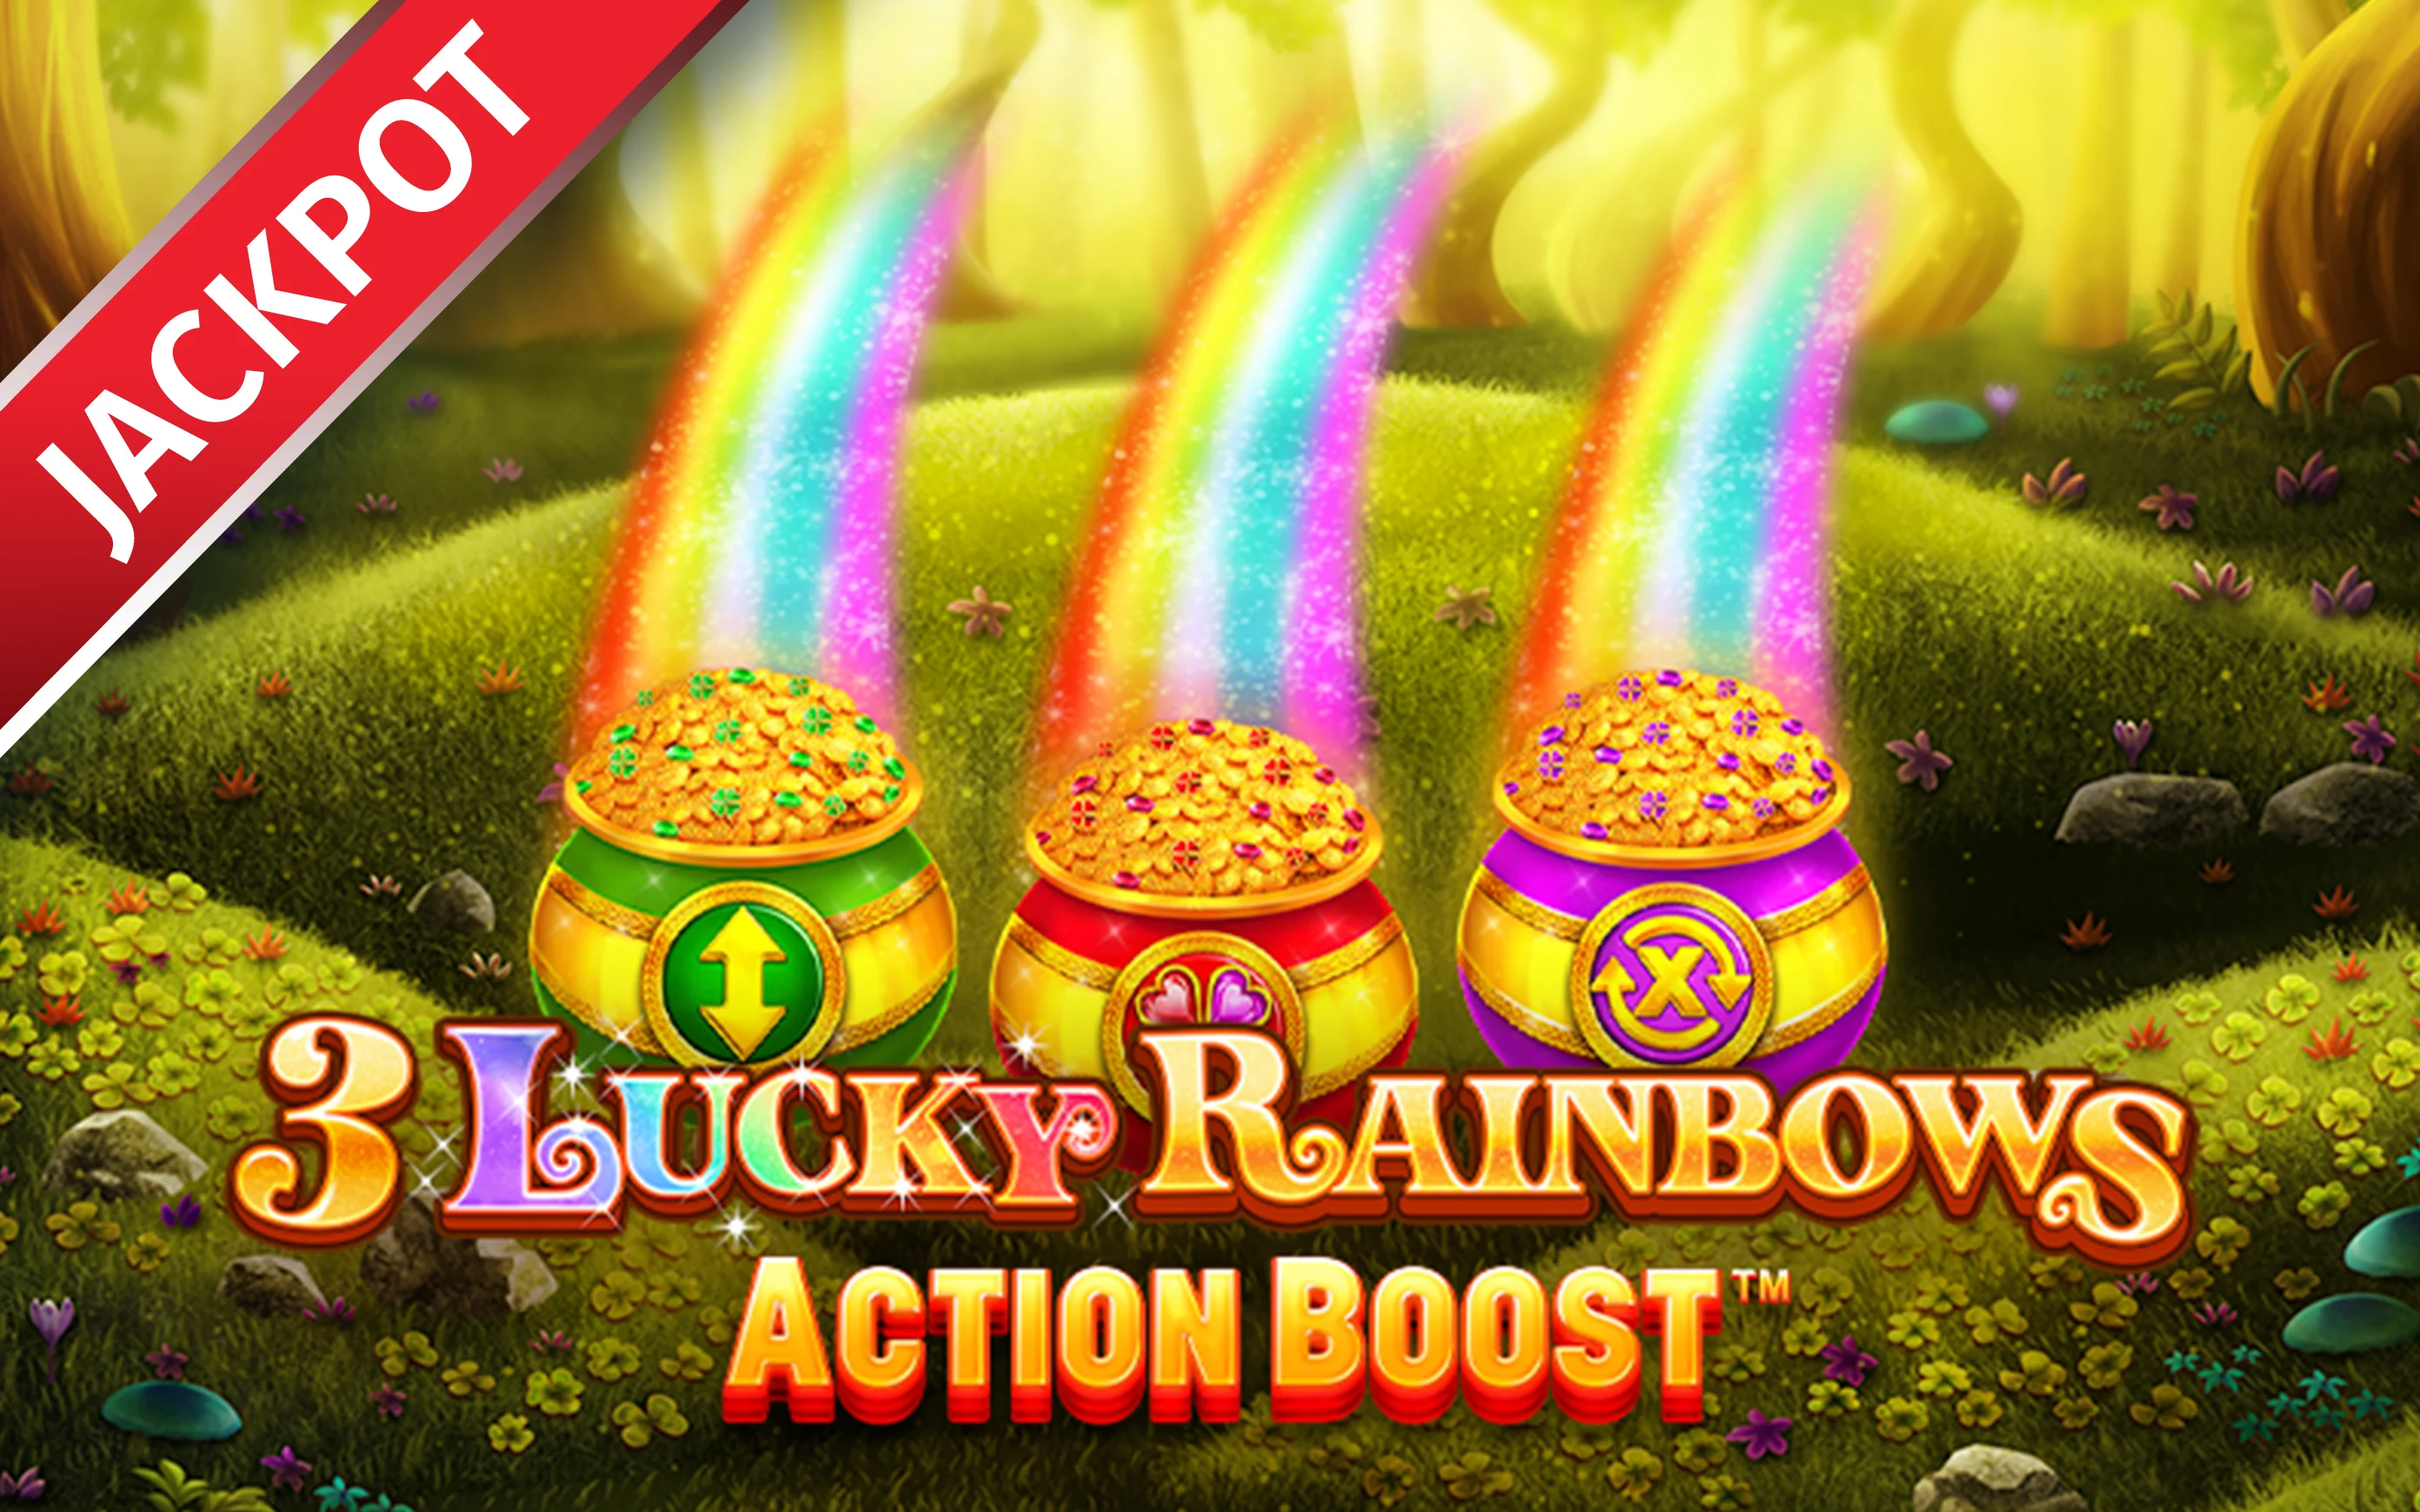 Play Action Boost ™ 3 Lucky Rainbows on Starcasino.be online casino